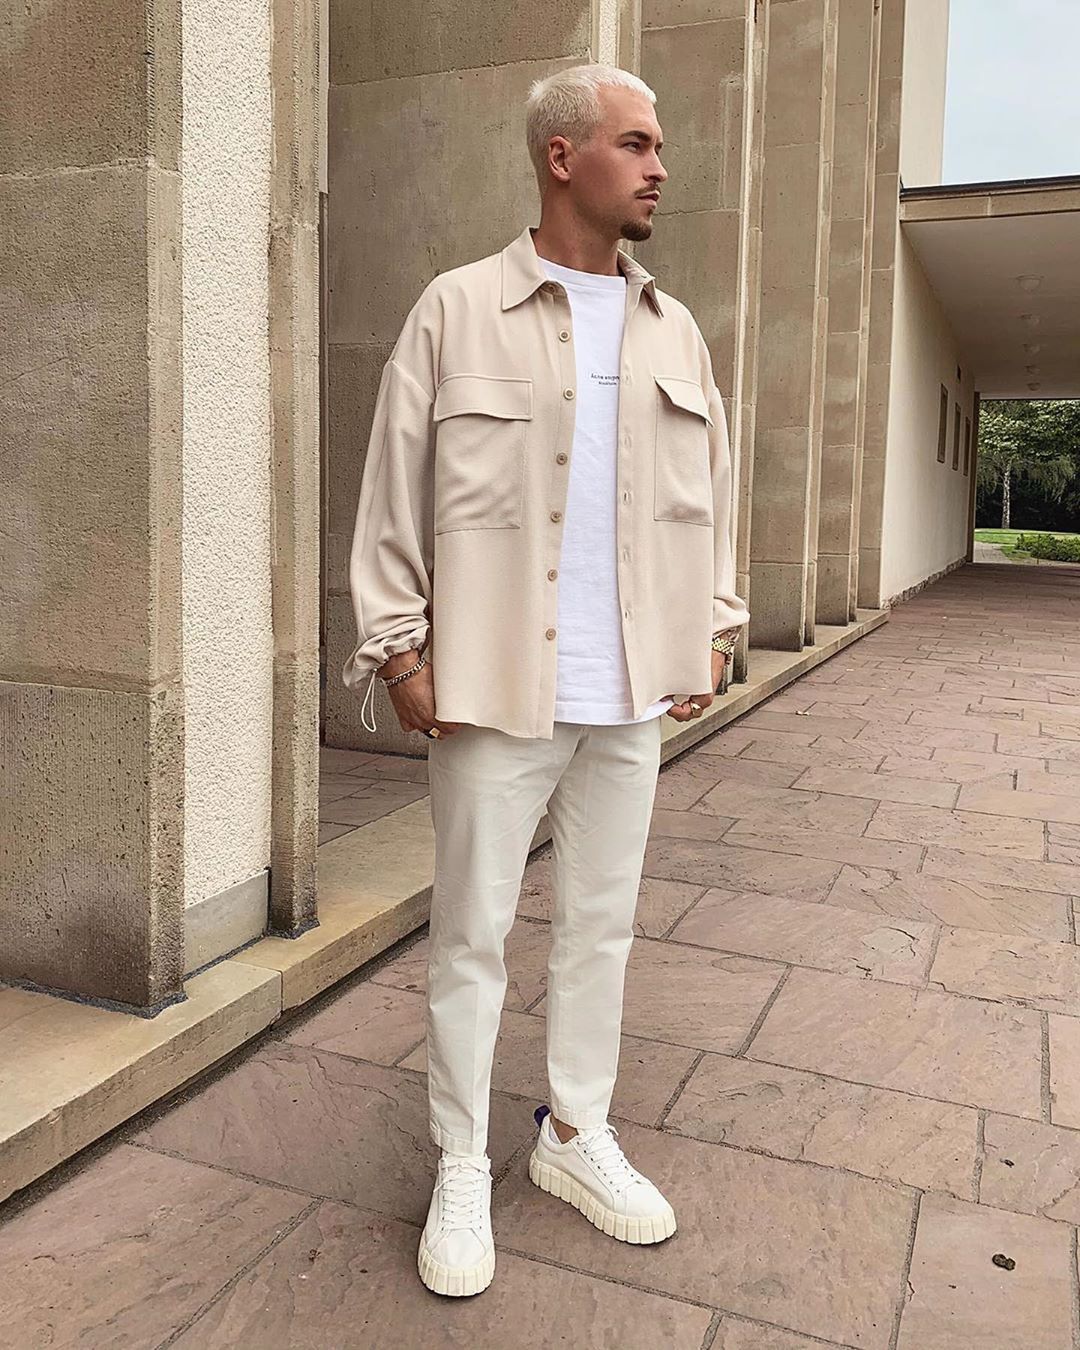 Menswear on Instagram: “Take a look at @timoniermann8's cozy and clean style. Which look is your fav: 1,2 or 3? #lessiswore” -   fitness Outfits menswear